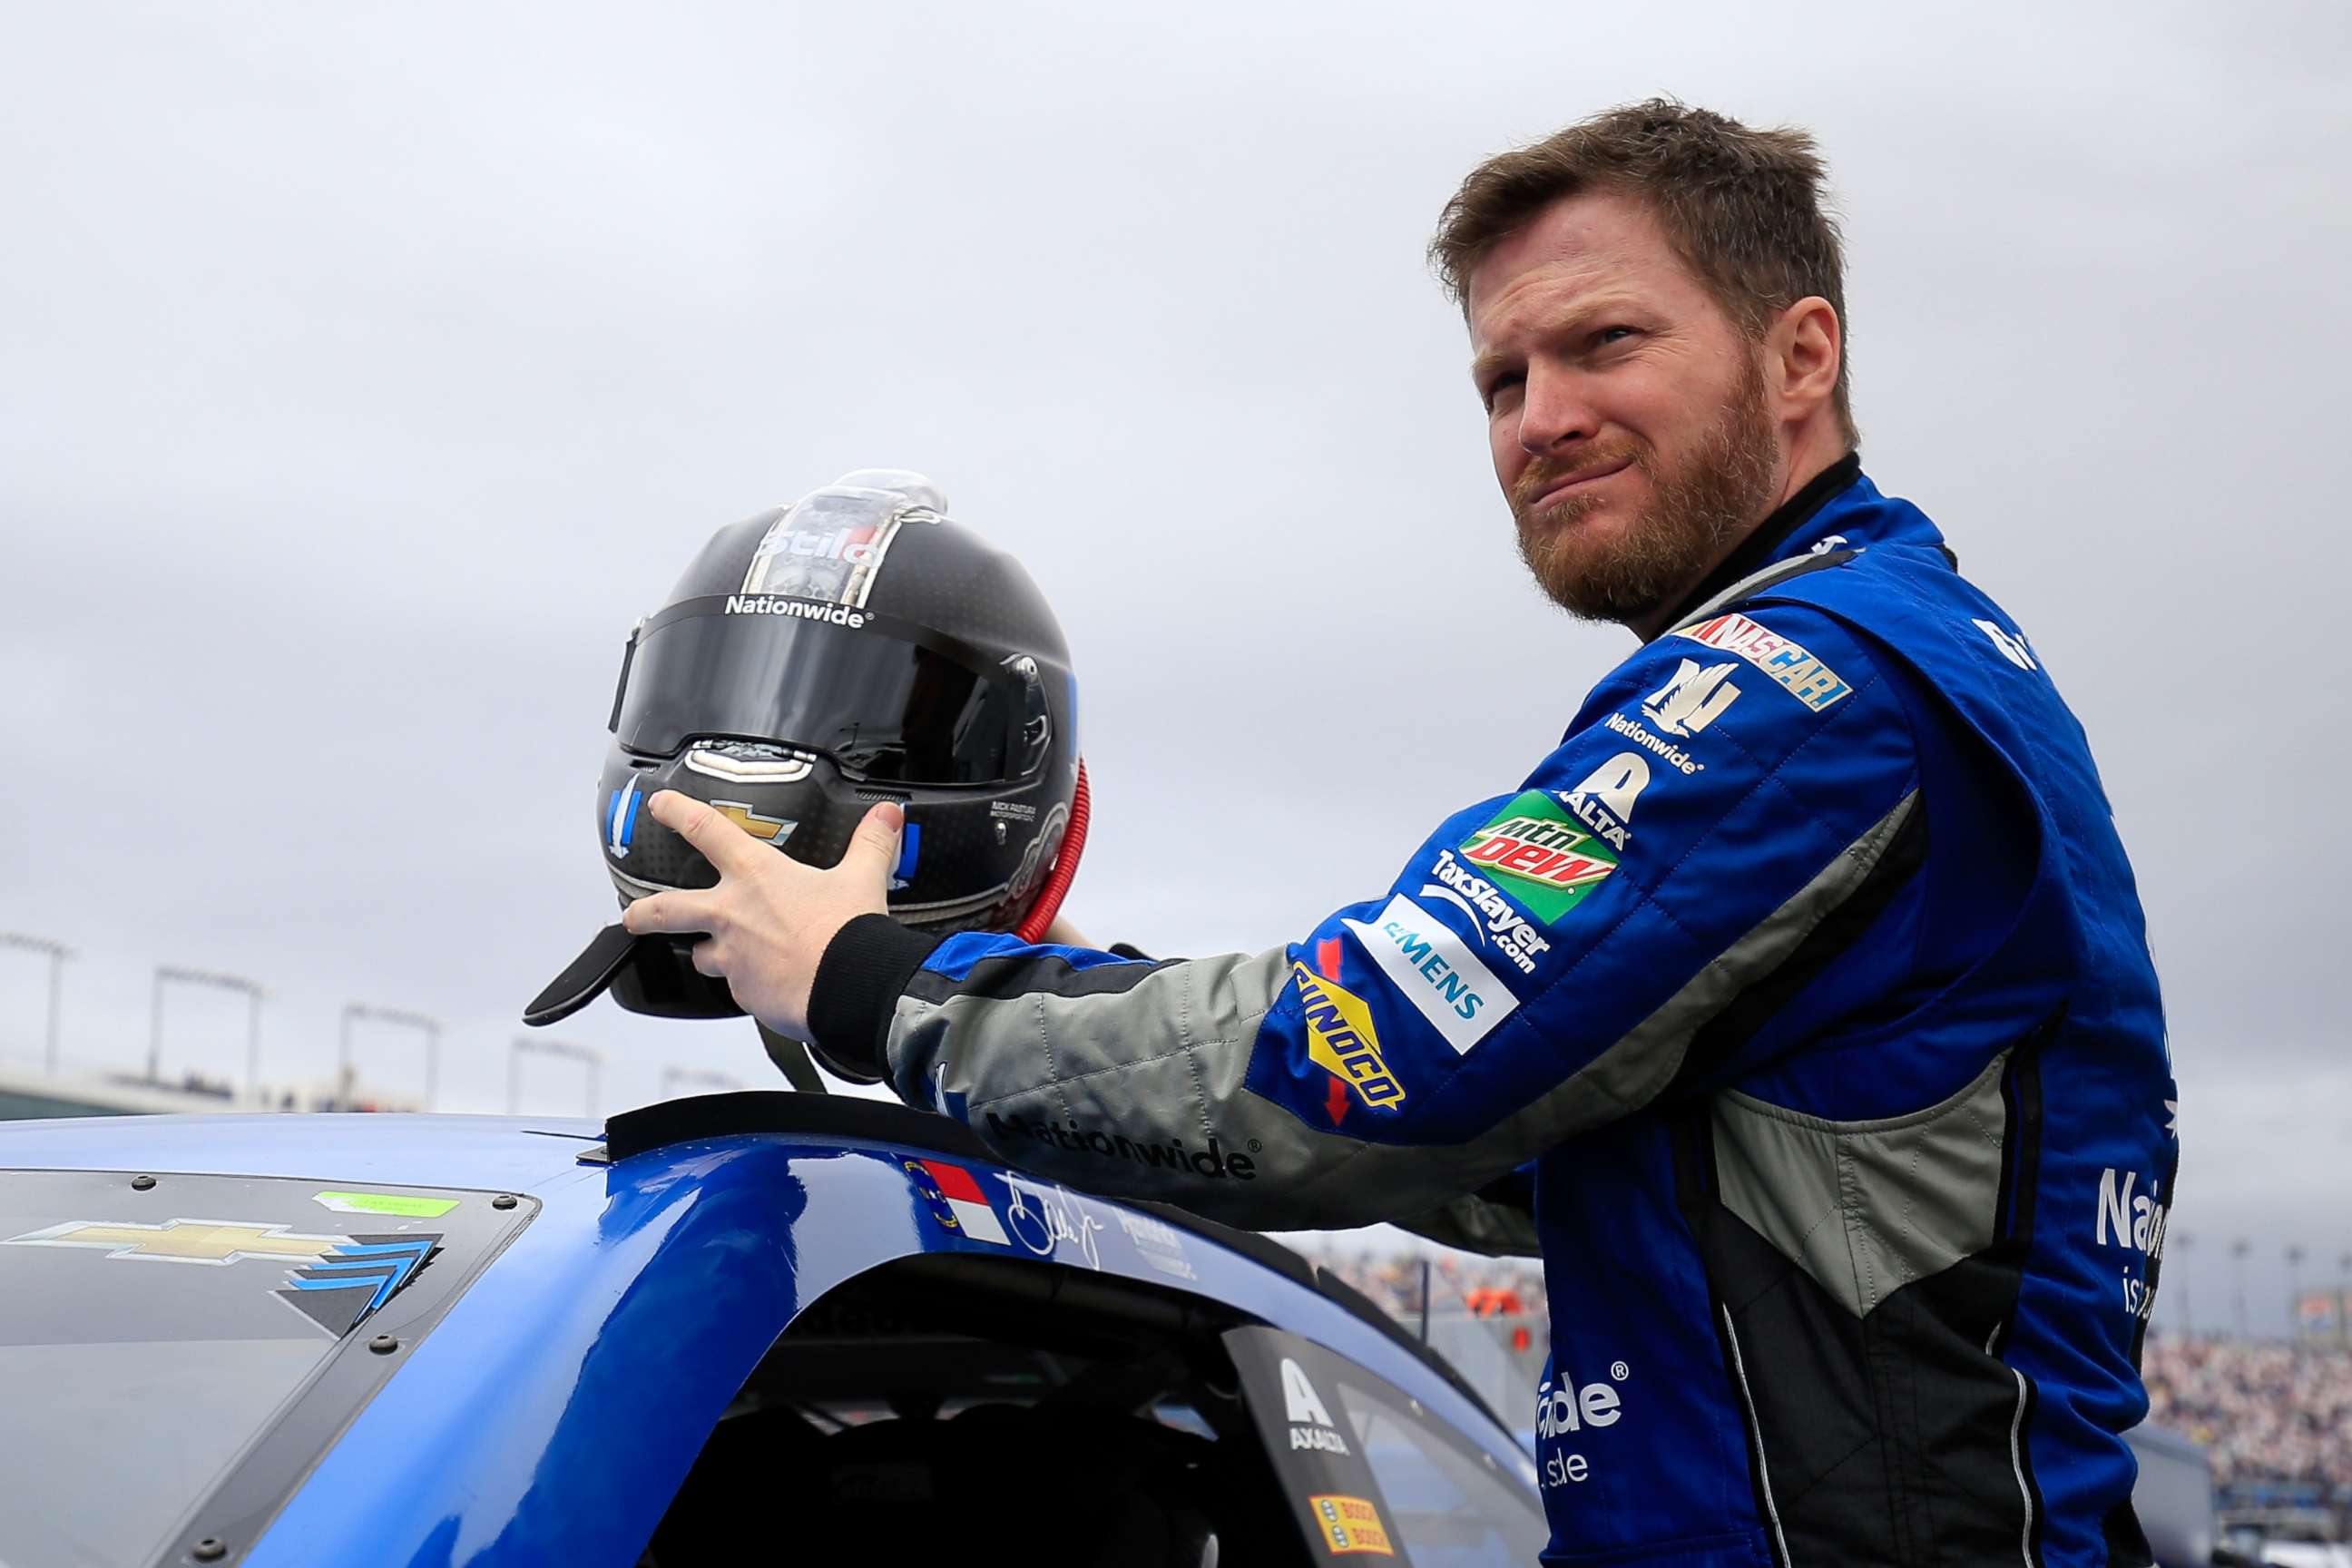 PHOTO: Dale Earnhardt Jr, driver of the #88 Nationwide Chevrolet, prepares to drive during the NASCAR Sprint Cup Series Koblat 400 at Las Vegas Motor Speedway, March 6, 2016 in Las Vegas. 